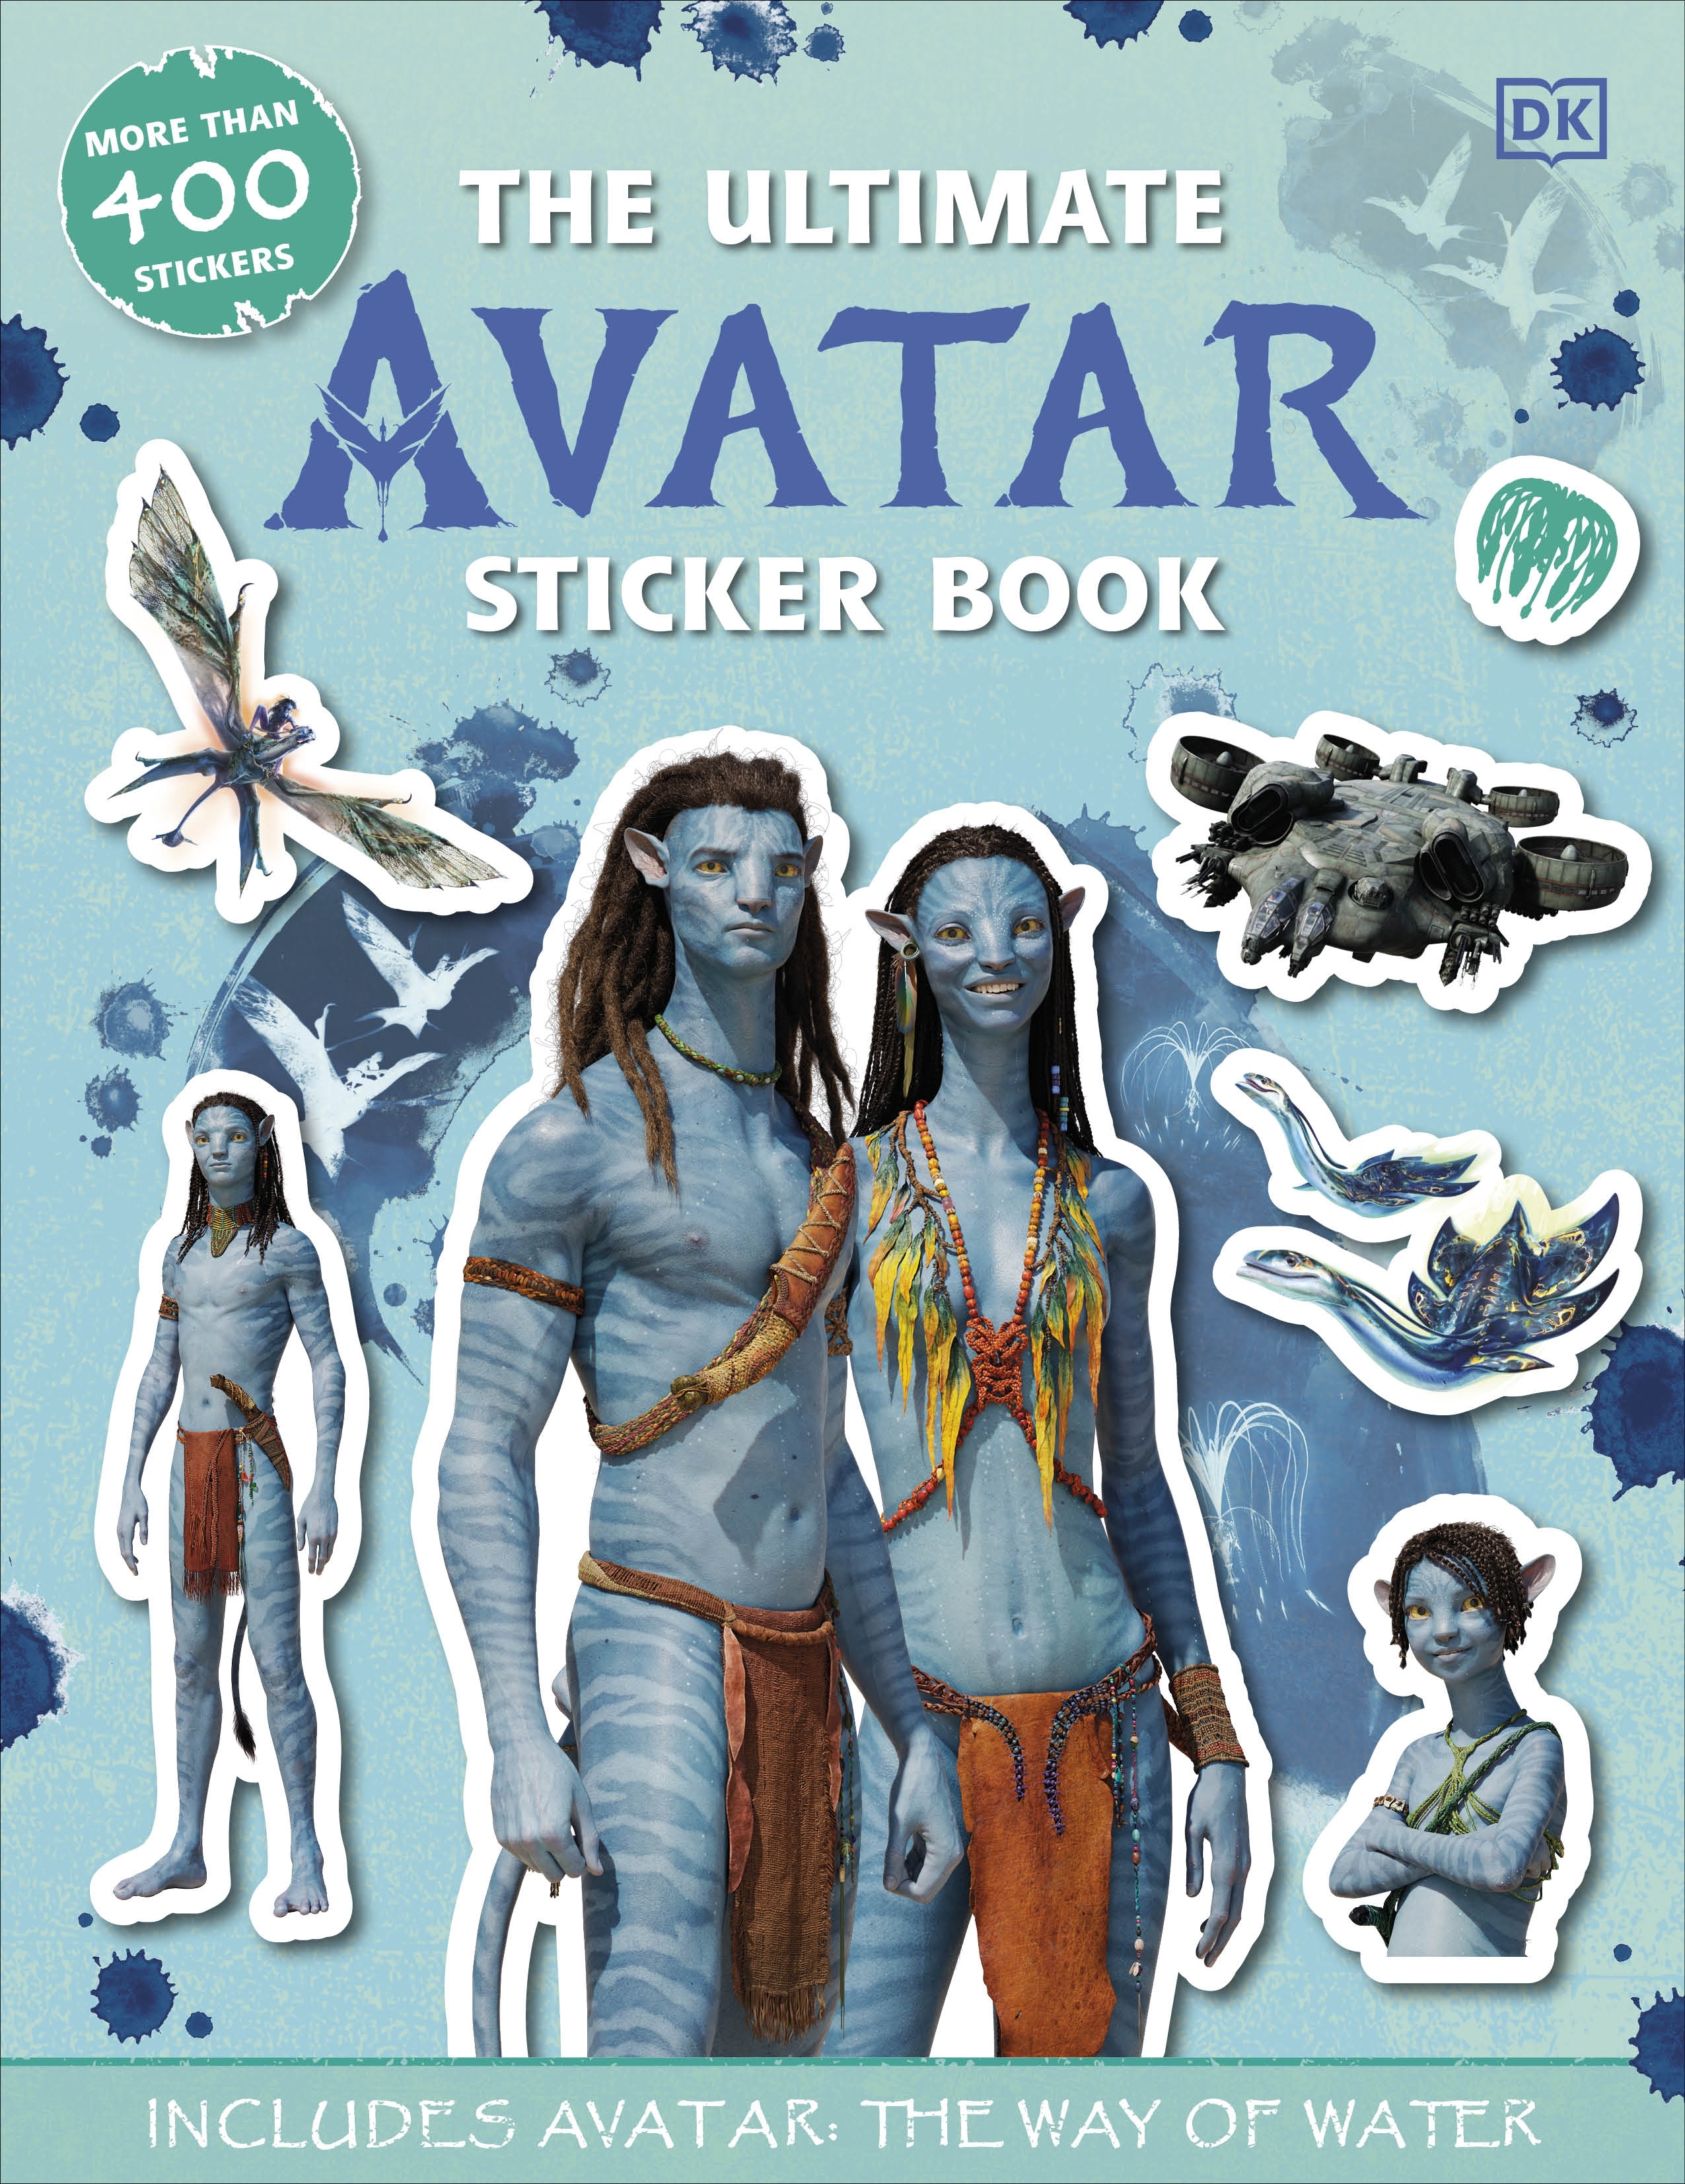 The Ultimate Avatar Sticker Book by DK  Penguin Books New Zealand